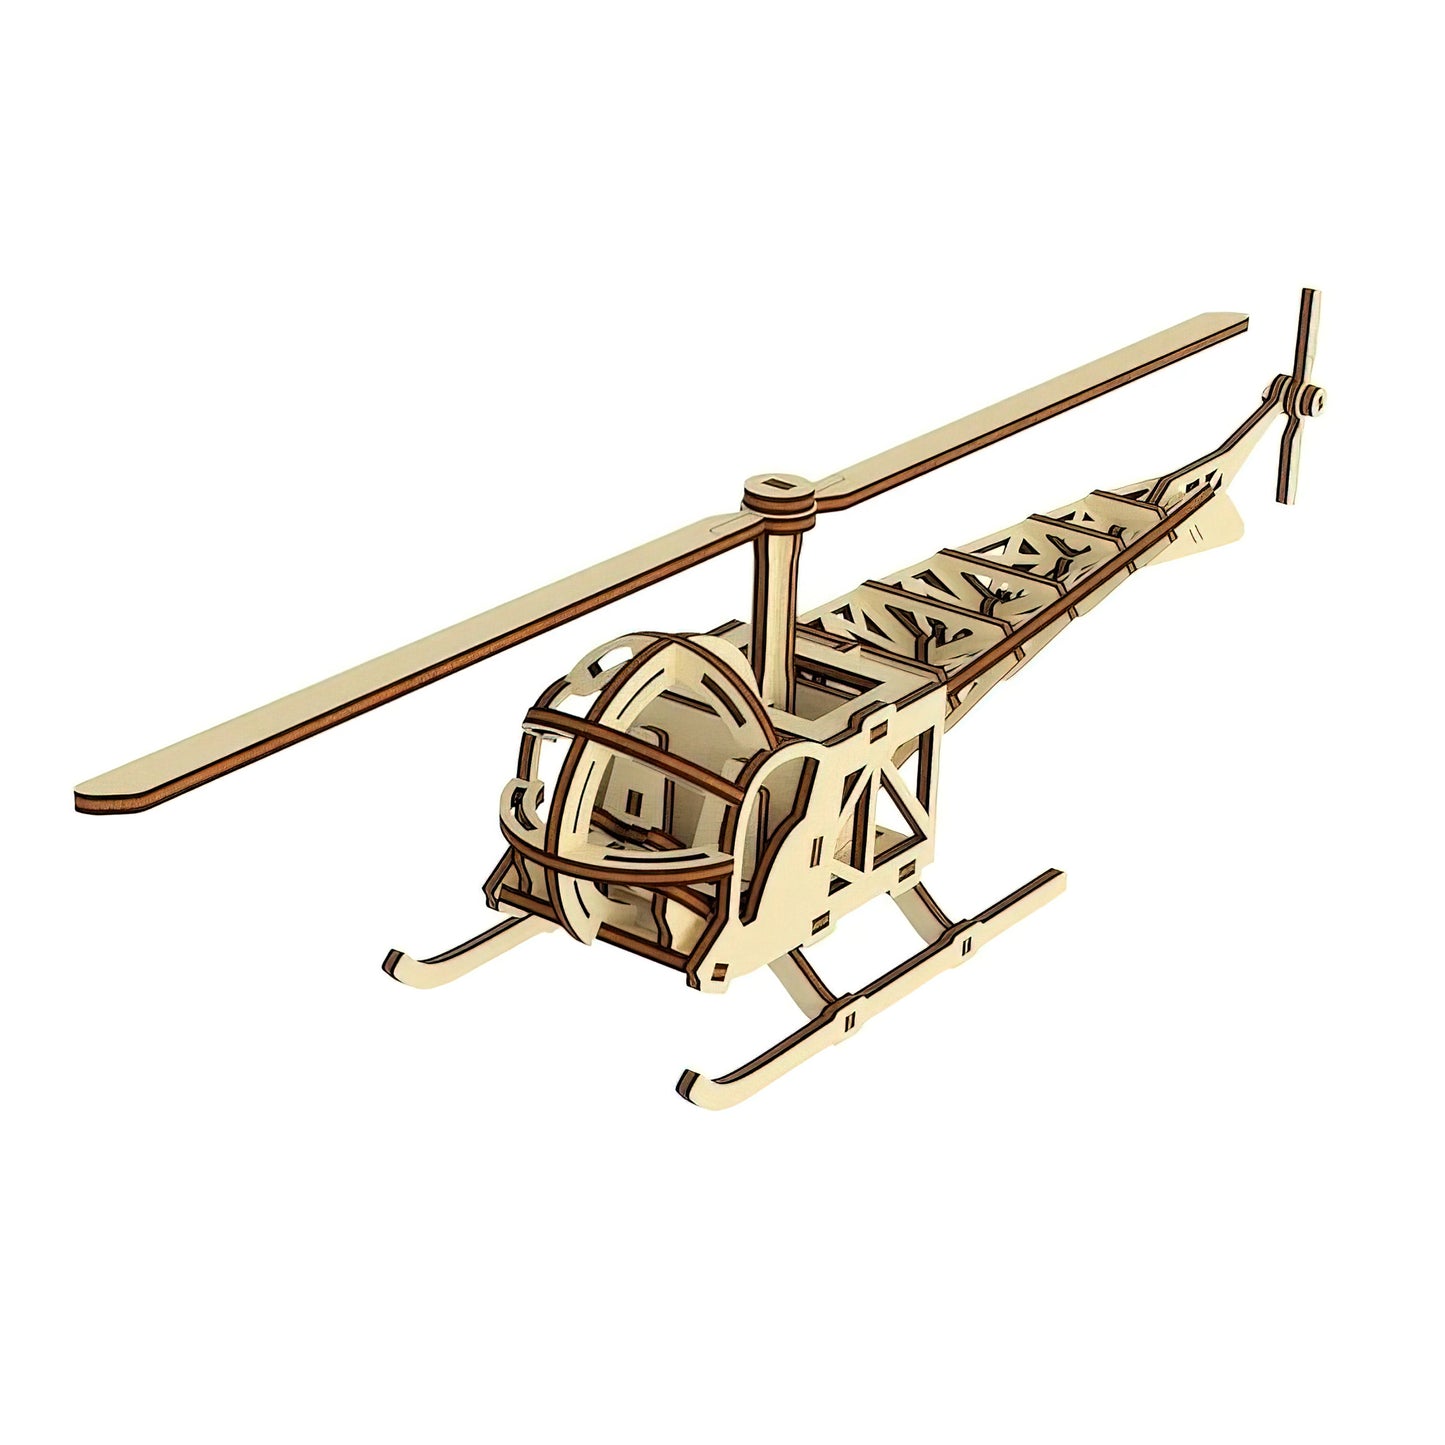 Light Helicopter Model with Rotating Blades